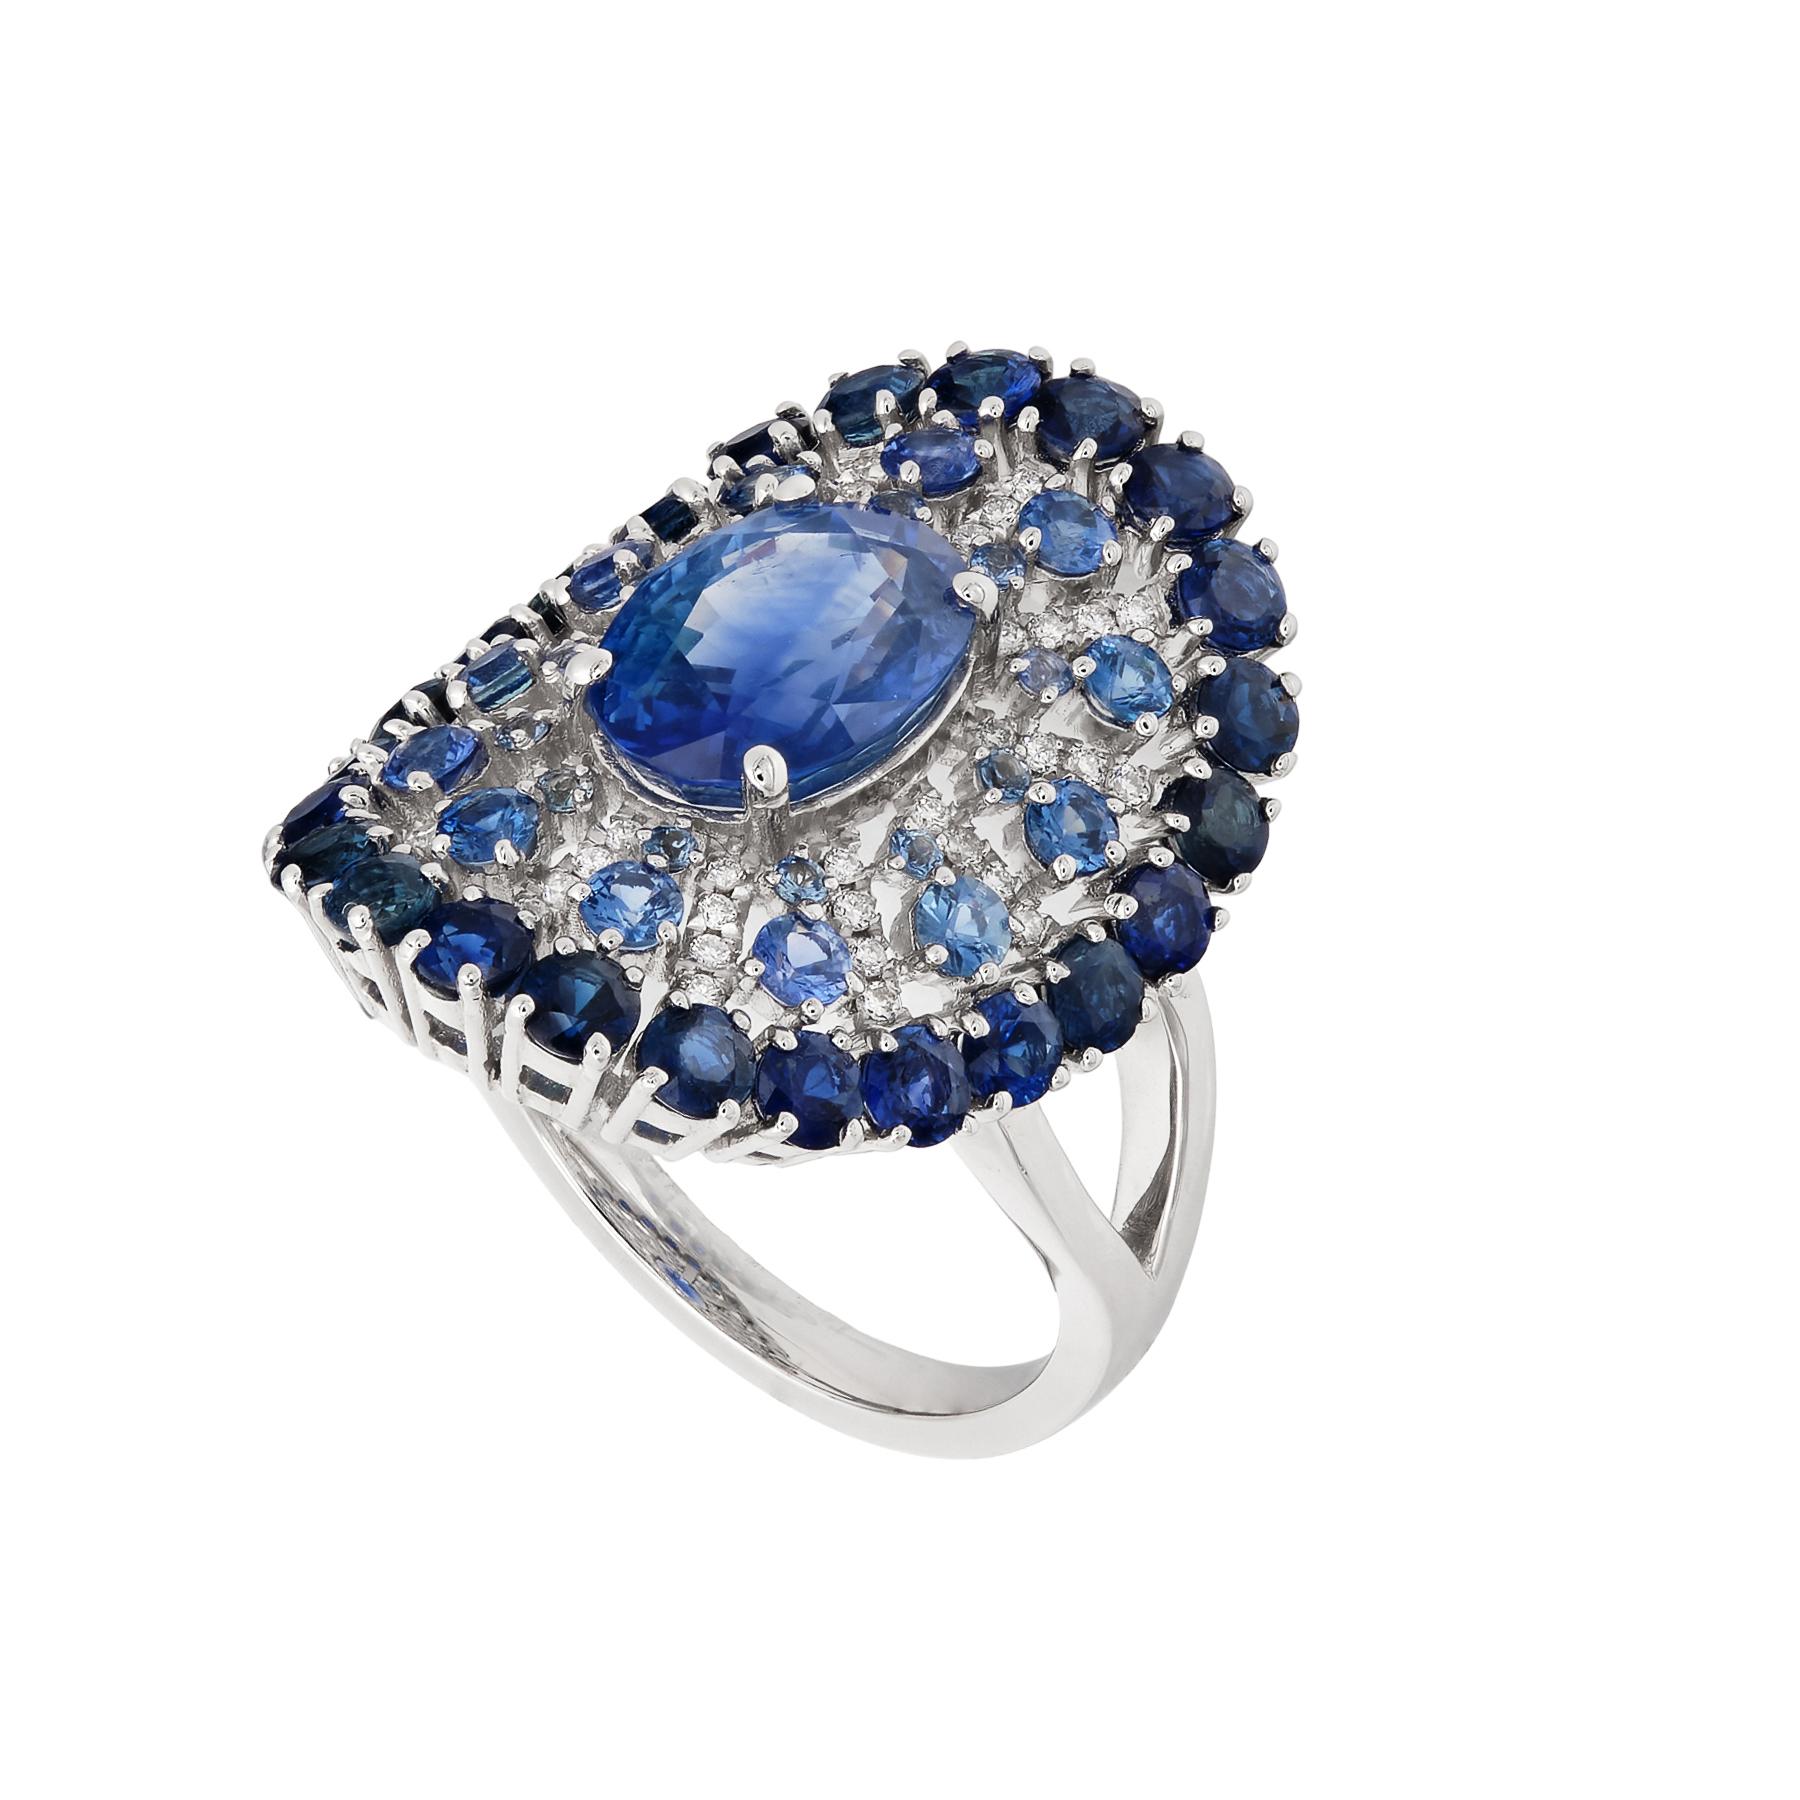 Shield cocktail ring with center oval blue sapphire, with a round diamonds and sapphires 'lace' pattern.

Ring size: 6.5 U.S.
Blue Sapphire: 5.87 ct total weight.
Diamond:  0.17 ct total weight.
All diamonds are G-H/SI stones.